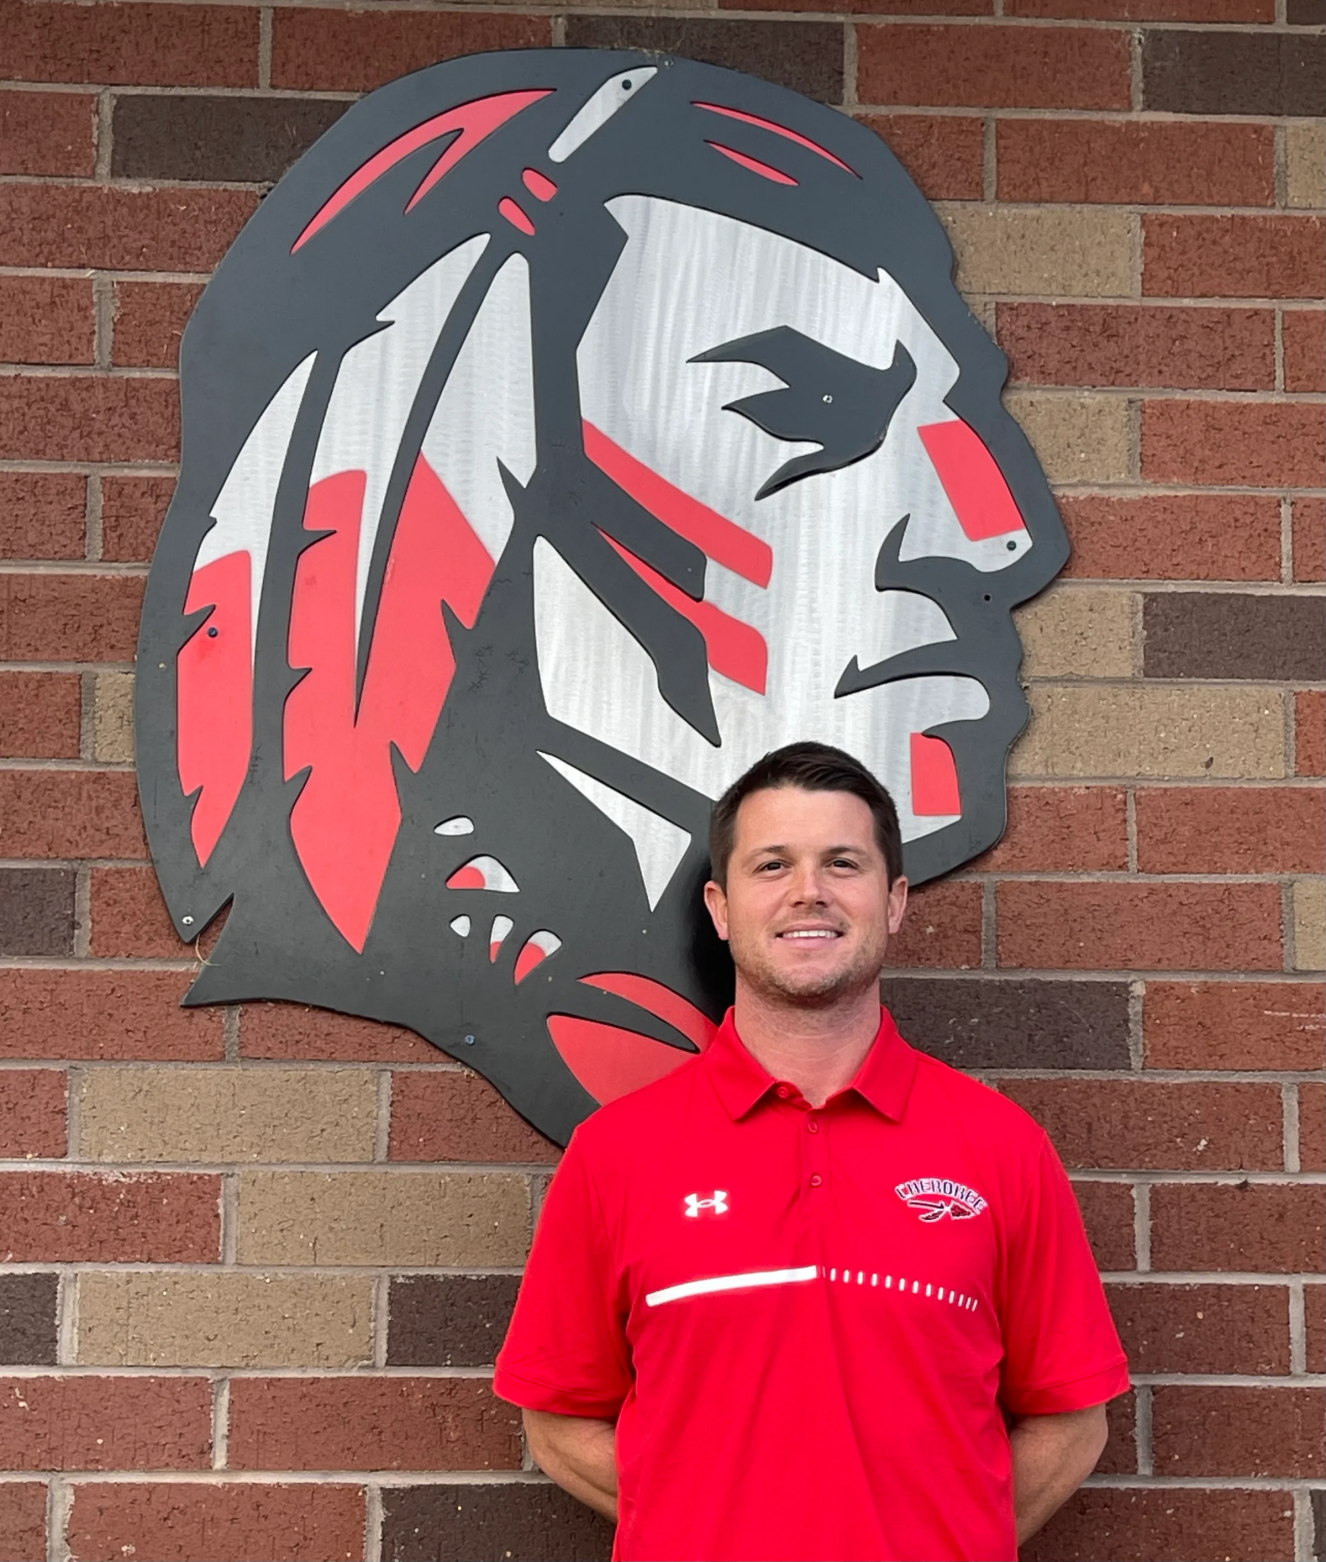 Cherokee High School Welcomes Adam Holley as New Football Coach to Lead Team to Success